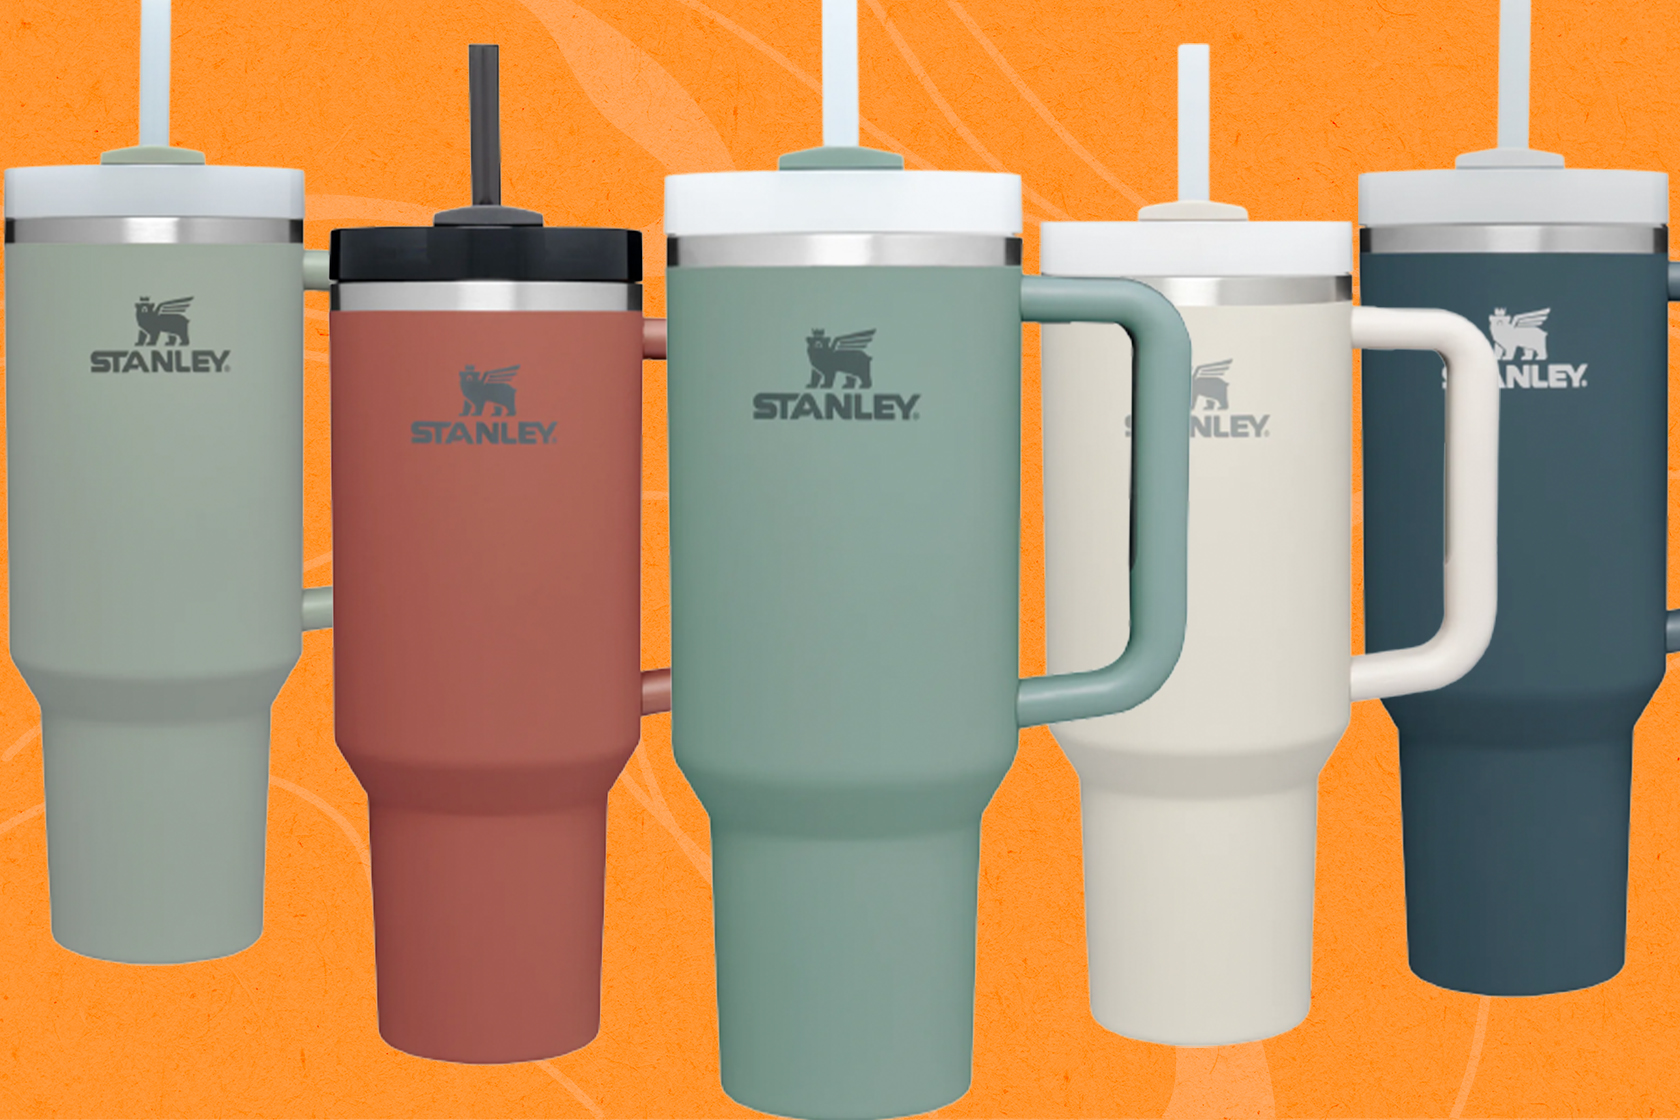 Get the Stanley tumbler in a brand new color before it sells out